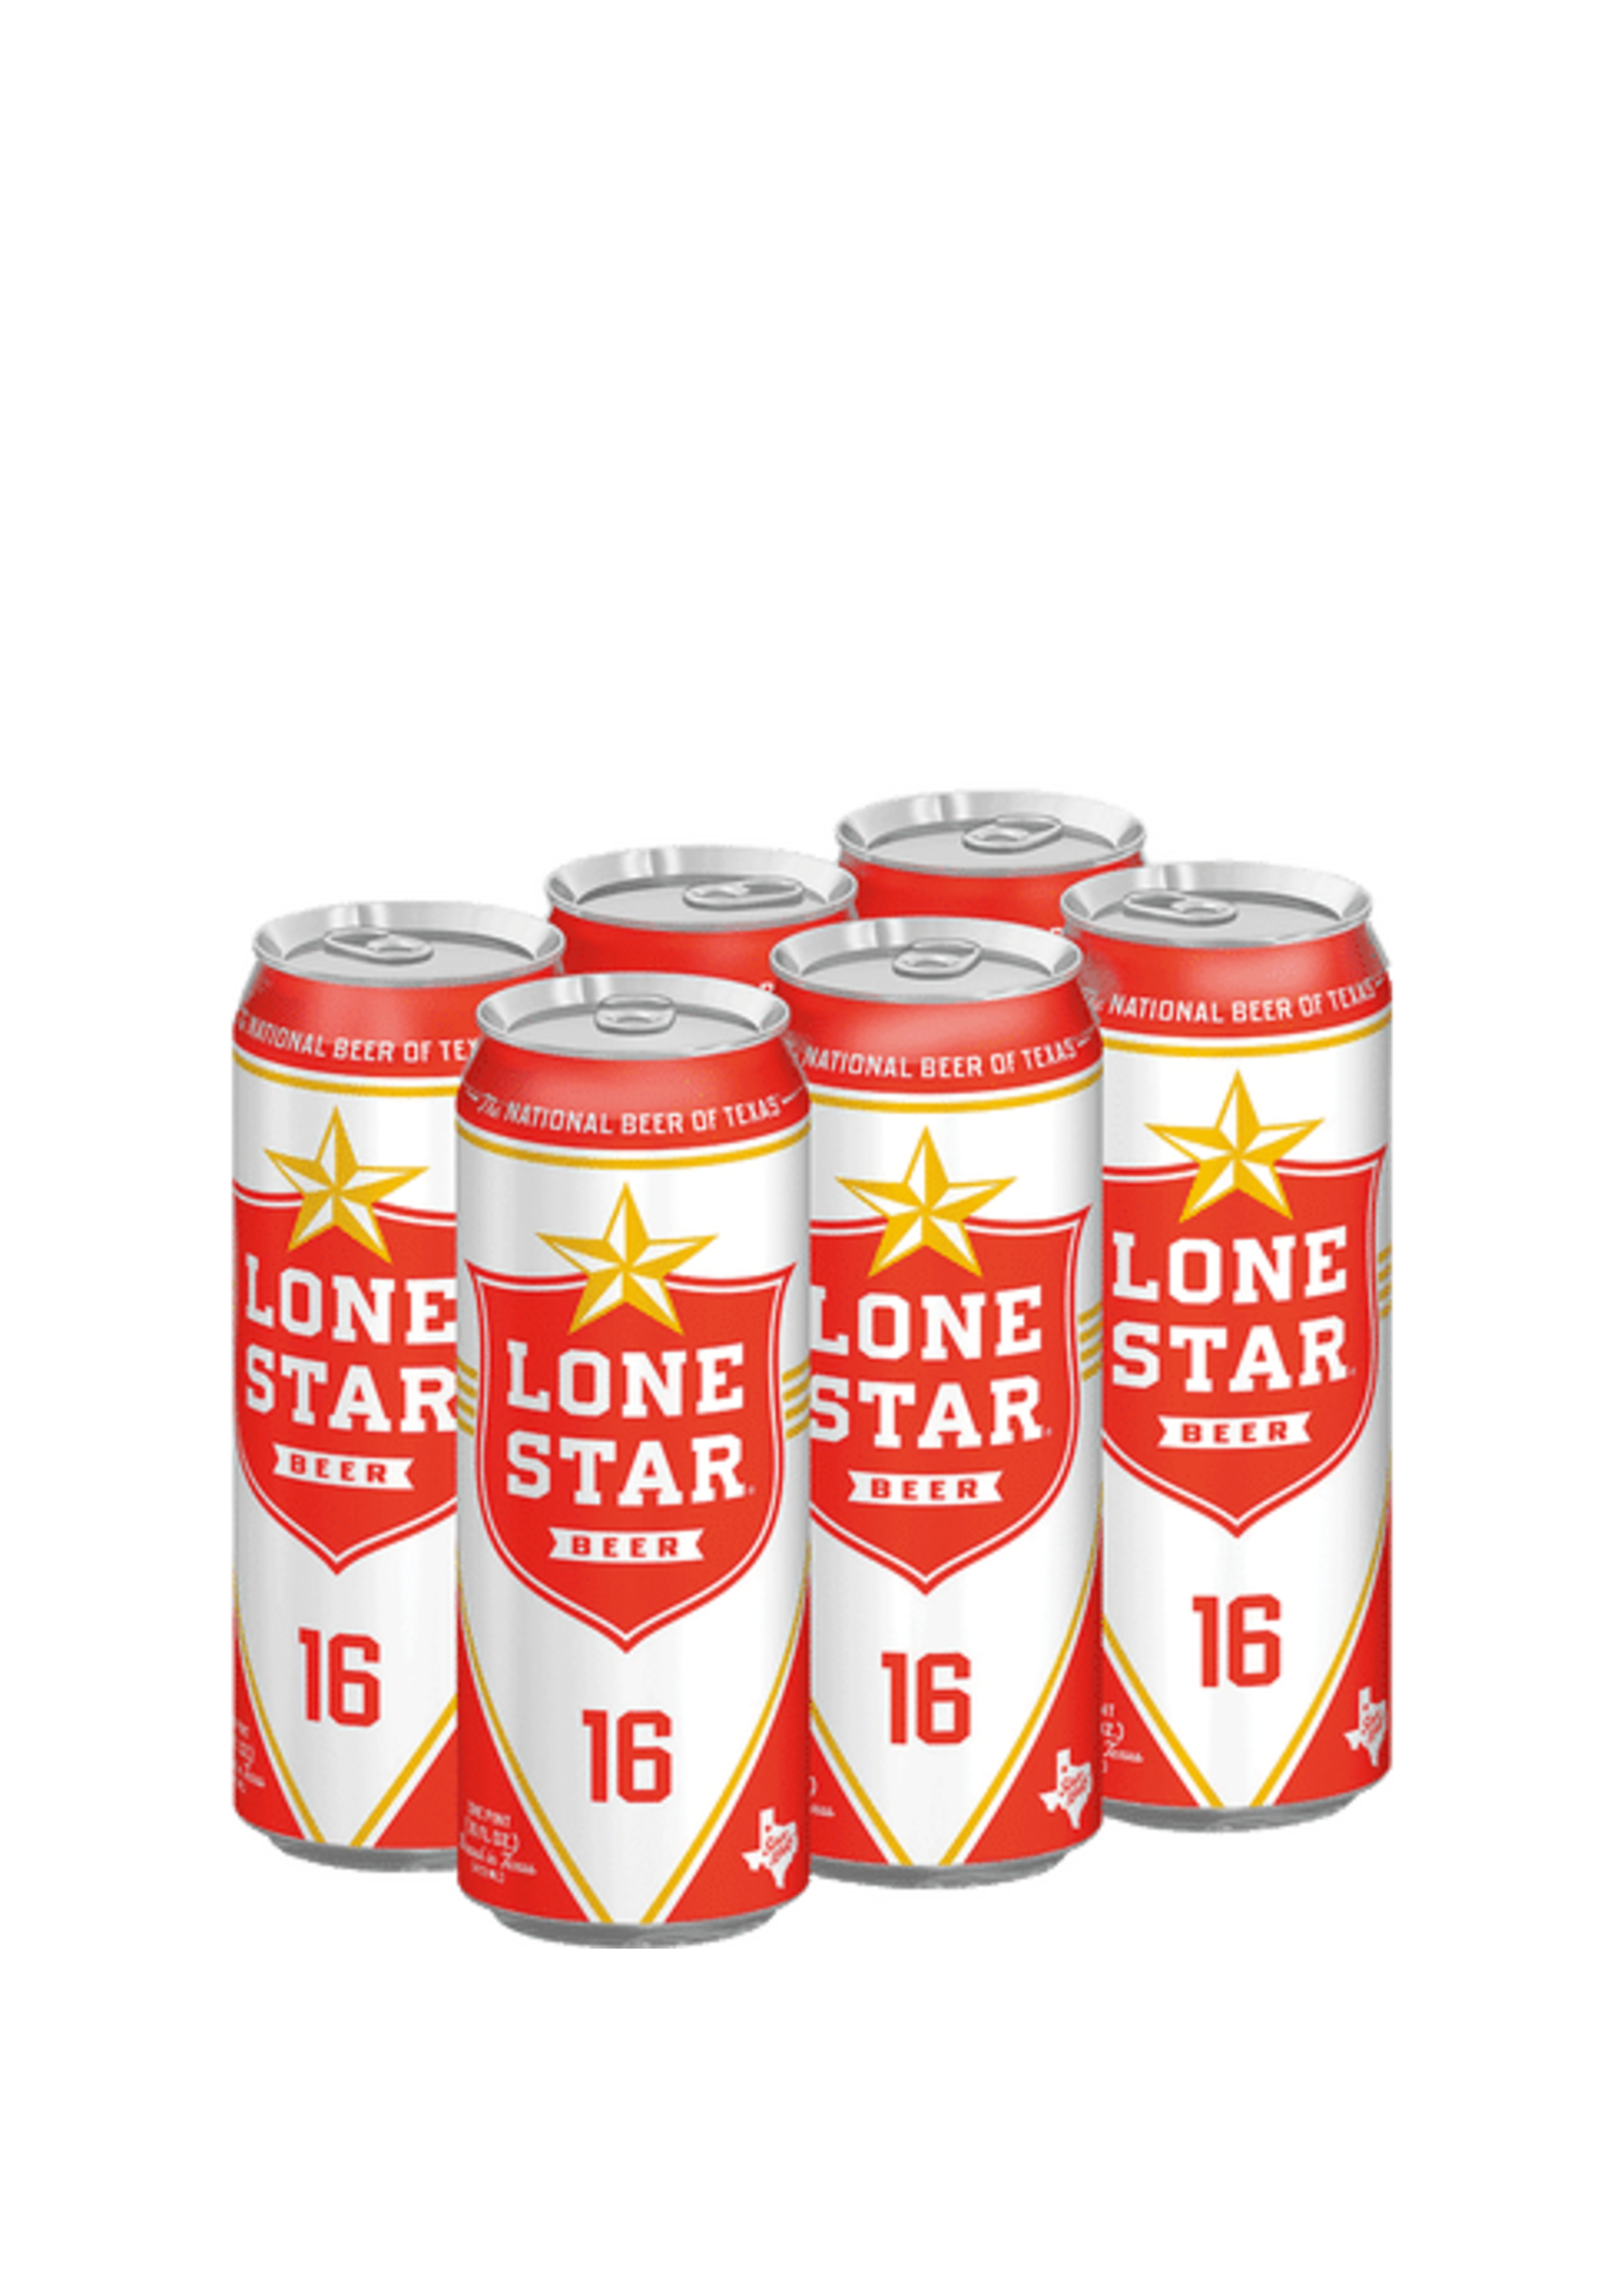 Lone Star Imperial Pint With 16 oz Beer Measuring Mark